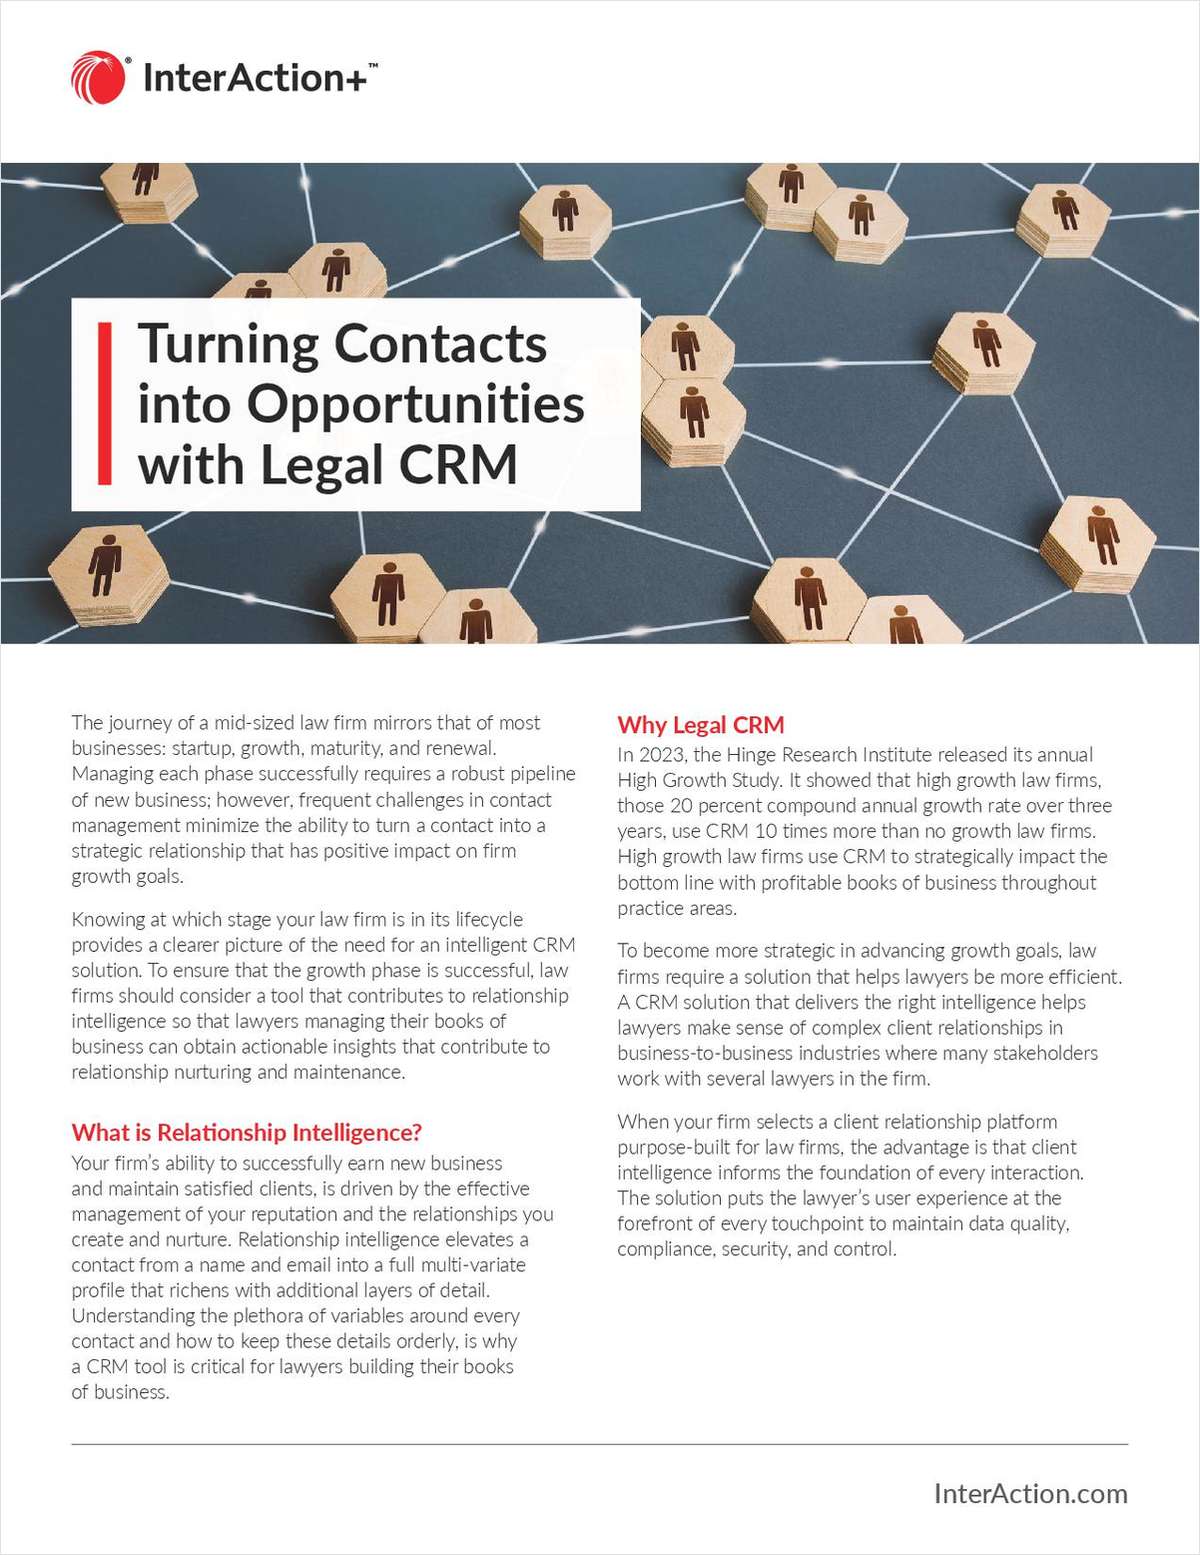 For mid-sized law firms navigating the growth stage, leveraging relationship intelligence and the power of a legal CRM can lead to enduring success. This white paper will help you understand how to transform contacts into potent, strategic relationships to drive growth.